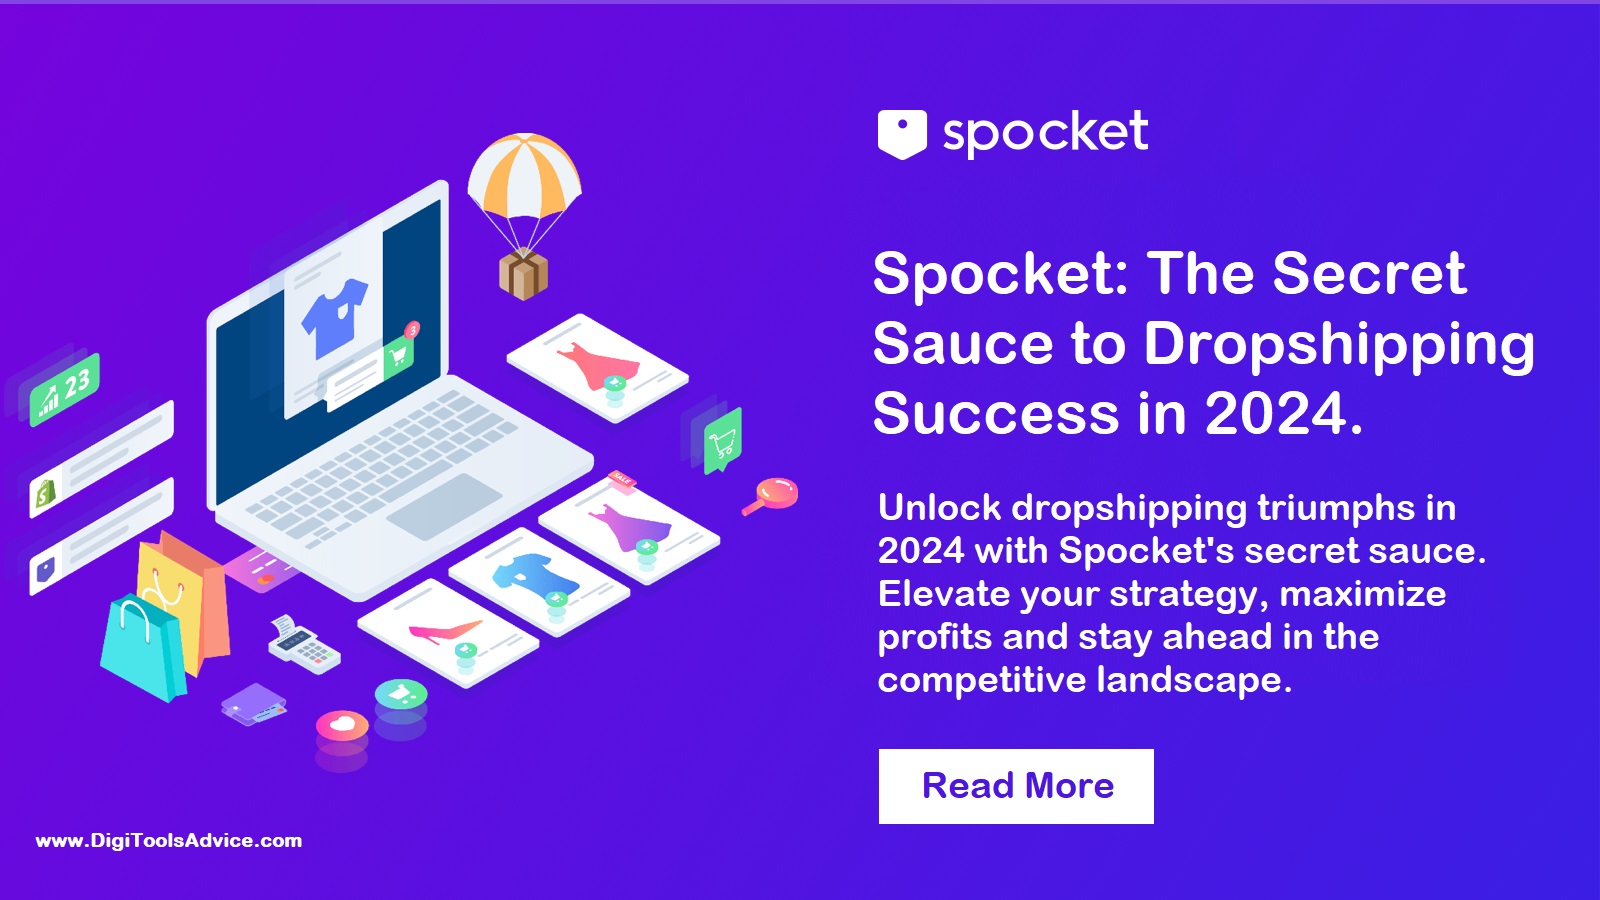 Spocket The Secret Sauce to Dropshipping Success in 2024.